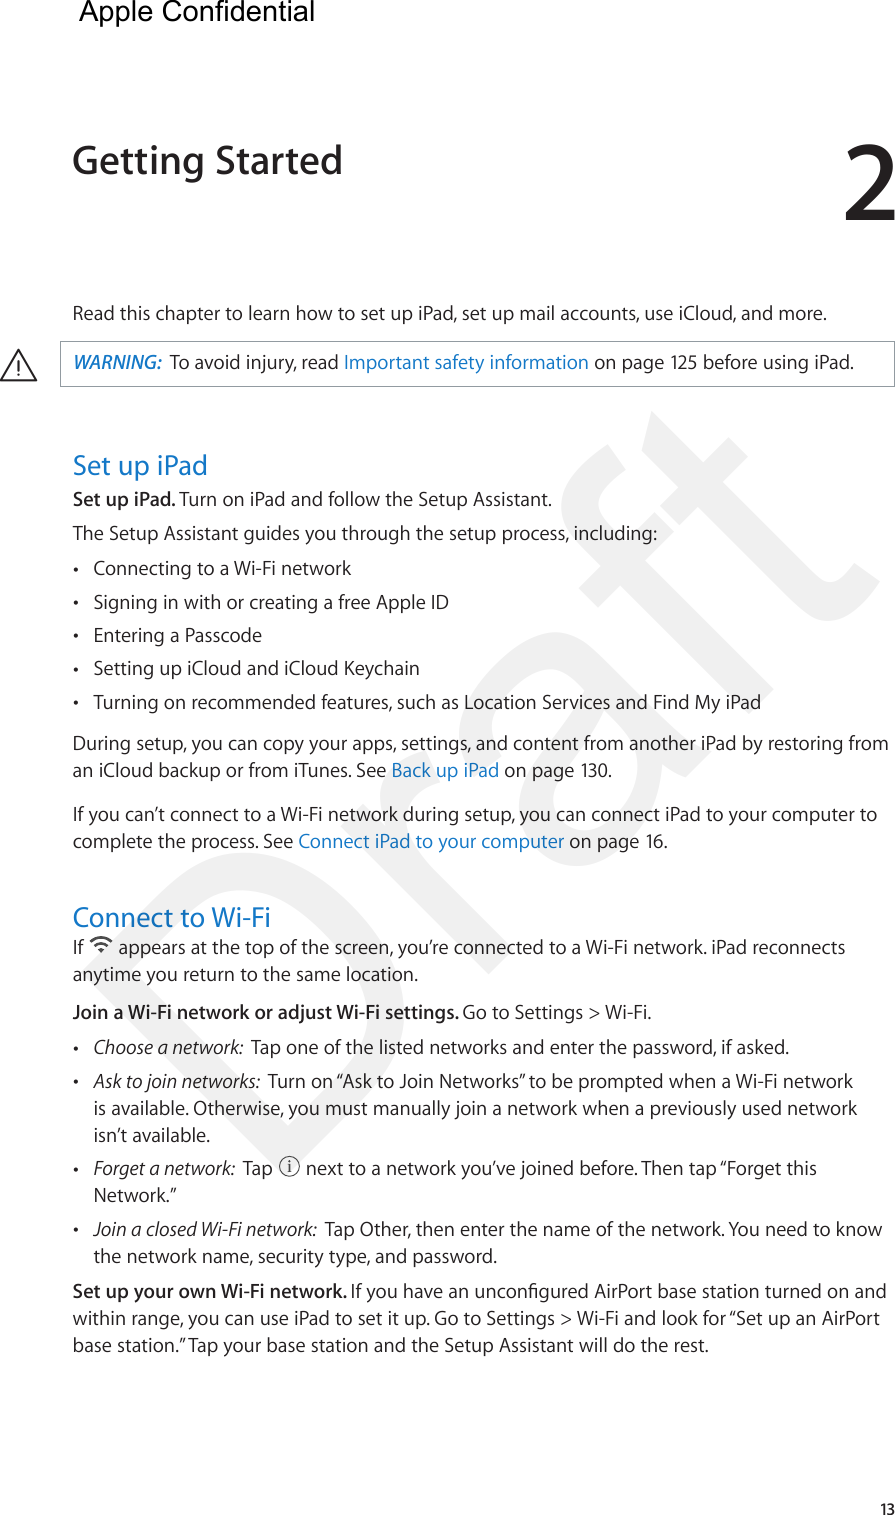 213Read this chapter to learn how to set up iPad, set up mail accounts, use iCloud, and more. ·WARNING:  To avoid injury, read Important safety information on page 125 before using iPad.Set up iPadSet up iPad. Turn on iPad and follow the Setup Assistant.The Setup Assistant guides you through the setup process, including:  •Connecting to a Wi-Fi network •Signing in with or creating a free Apple ID •Entering a Passcode •Setting up iCloud and iCloud Keychain •Turning on recommended features, such as Location Services and Find My iPadDuring setup, you can copy your apps, settings, and content from another iPad by restoring from an iCloud backup or from iTunes. See Back up iPad on page 130.If you can’t connect to a Wi-Fi network during setup, you can connect iPad to your computer to complete the process. See Connect iPad to your computer on page 16.Connect to Wi-FiIf   appears at the top of the screen, you’re connected to a Wi-Fi network. iPad reconnects anytime you return to the same location.Join a Wi-Fi network or adjust Wi-Fi settings. Go to Settings &gt; Wi-Fi. •Choose a network:  Tap one of the listed networks and enter the password, if asked. •Ask to join networks:  Turn on “Ask to Join Networks” to be prompted when a Wi-Fi networkis available. Otherwise, you must manually join a network when a previously used networkisn’t available. •Forget a network:  Tap   next to a network you’ve joined before. Then tap “Forget thisNetwork.” •Join a closed Wi-Fi network:  Tap Other, then enter the name of the network. You need to knowthe network name, security type, and password.Set up your own Wi-Fi network. within range, you can use iPad to set it up. Go to Settings &gt; Wi-Fi and look for “Set up an AirPort base station.” Tap your base station and the Setup Assistant will do the rest.Getting Started  Apple Confidential Draft